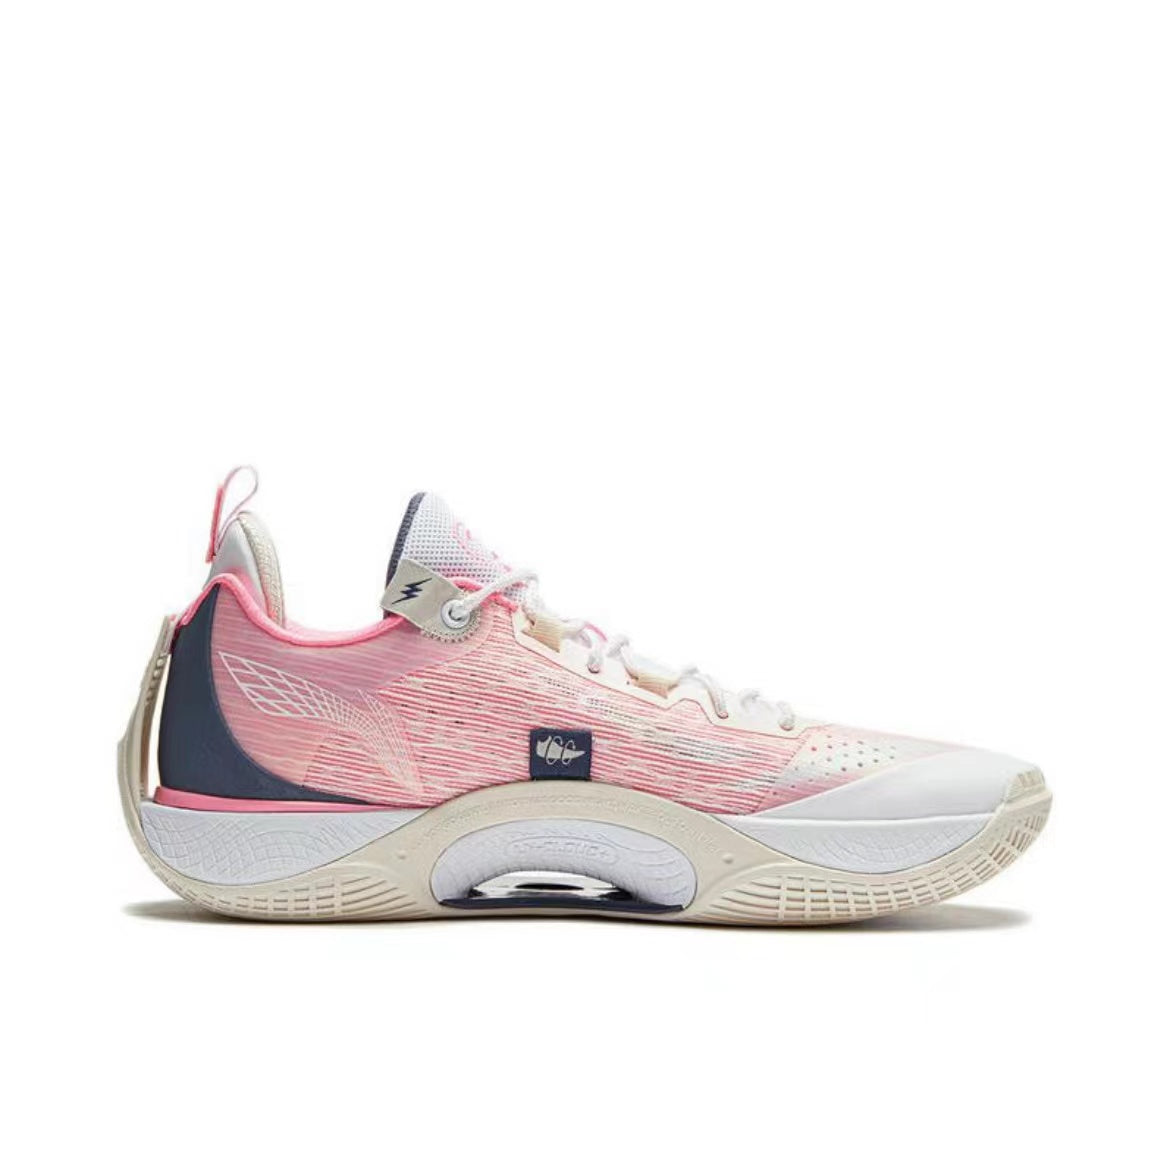 D'Angelo Russell x Li Ning Wade Shadow 5V2 - White/Pink